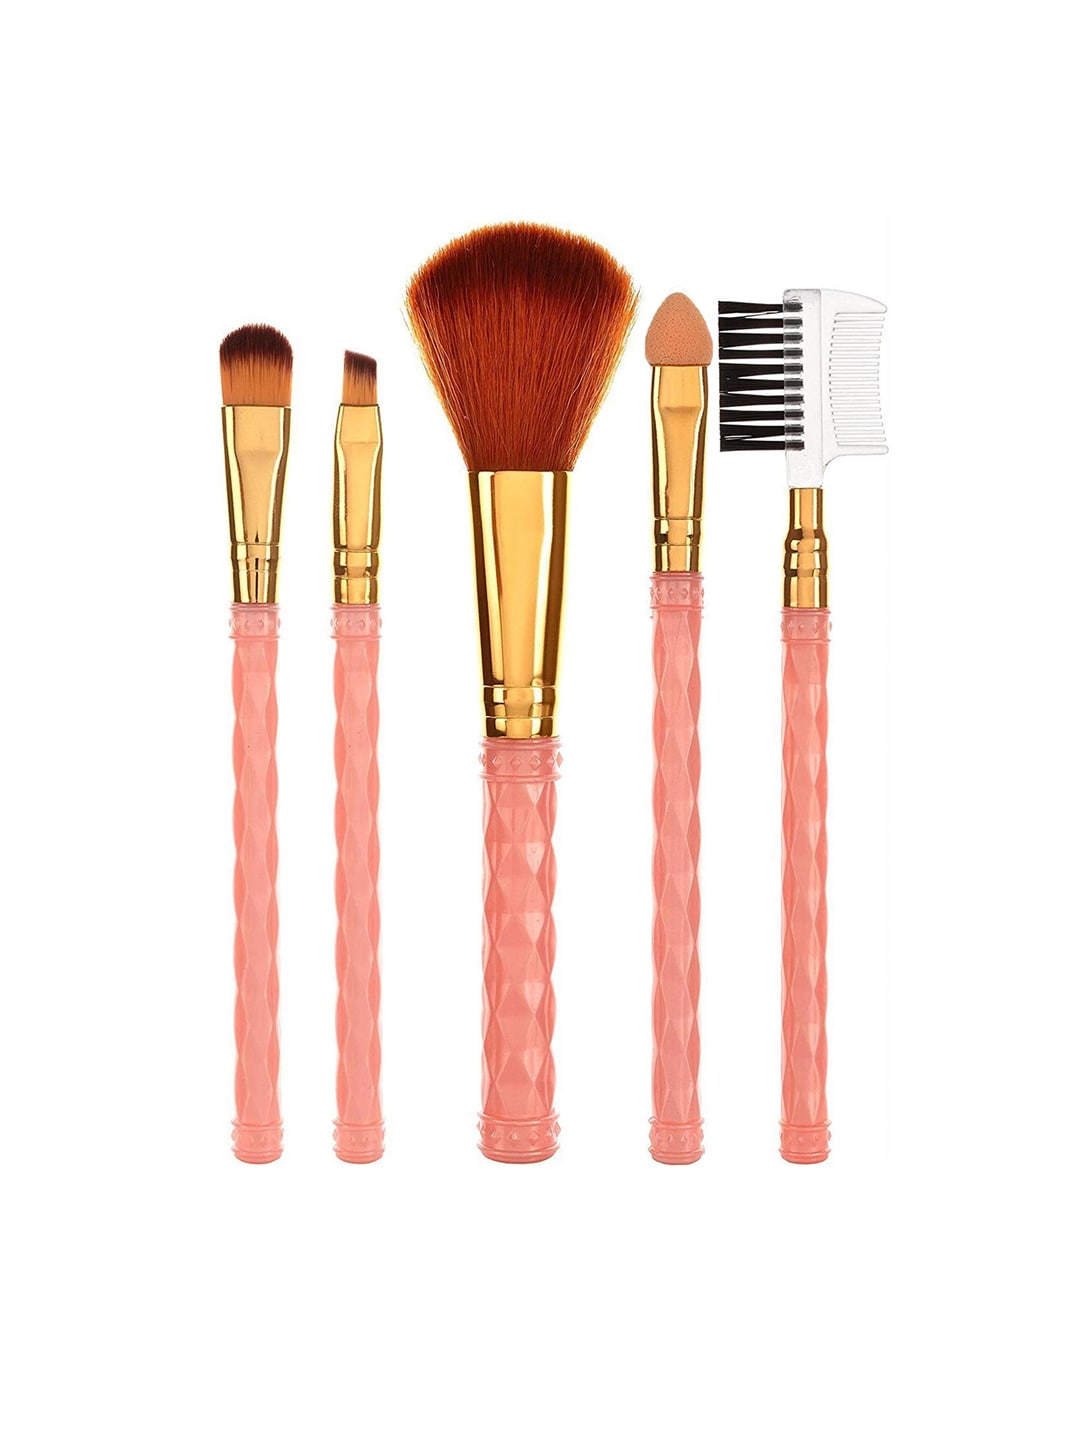 AY Professional Makeup Brushes - Set Of 5 Price in India